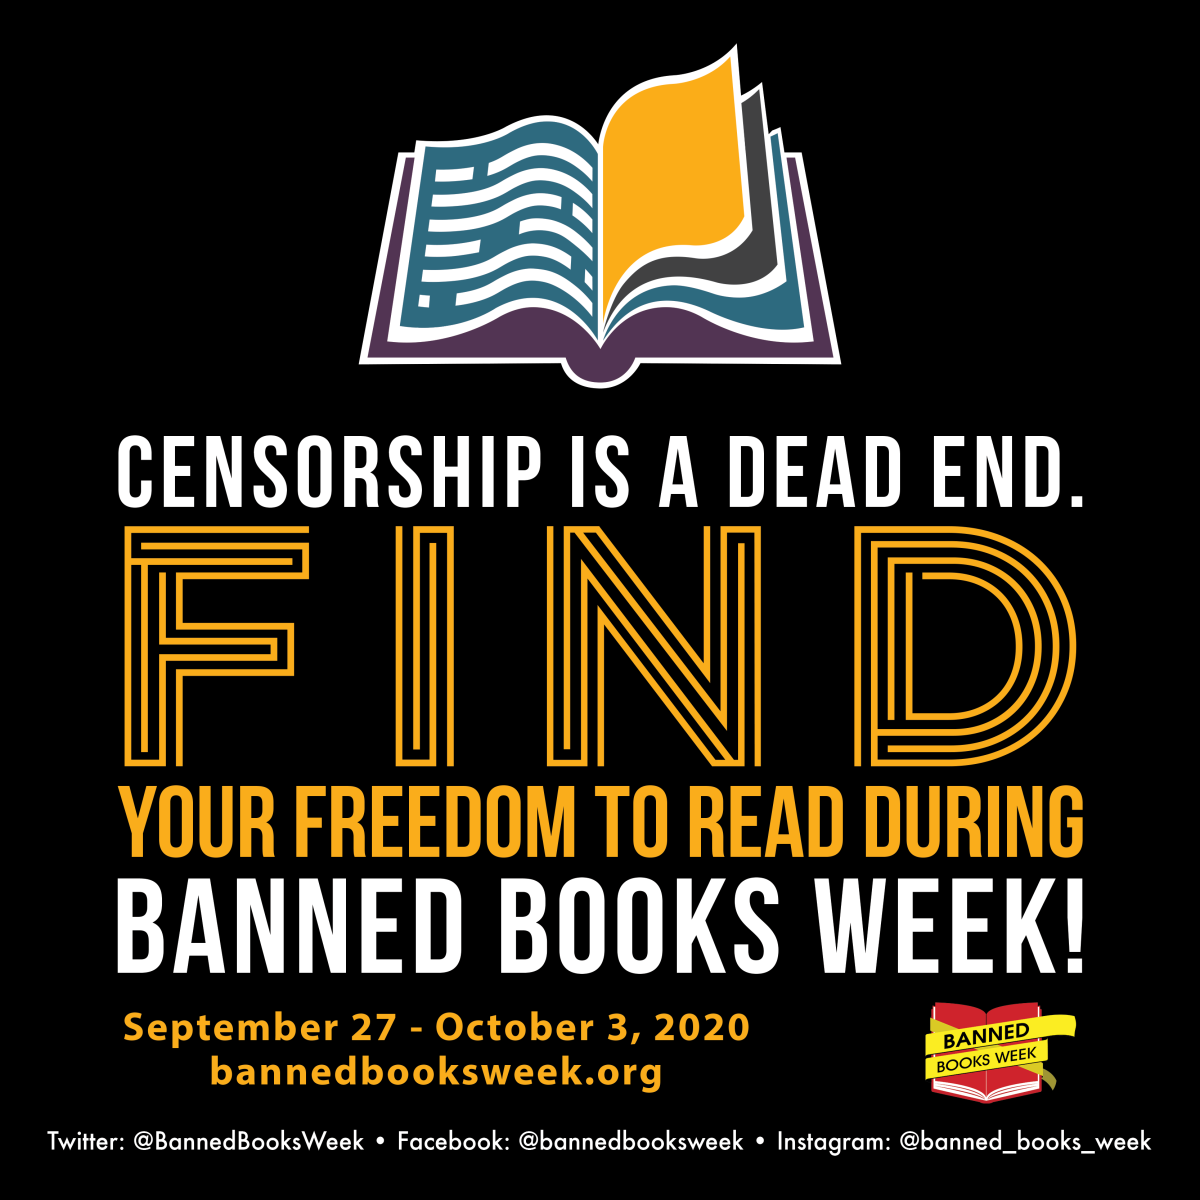 Banned Books Week 2020 Image book silhouette words Censorship is a Dead End Find Your Freedom to Read during Banned Books Week